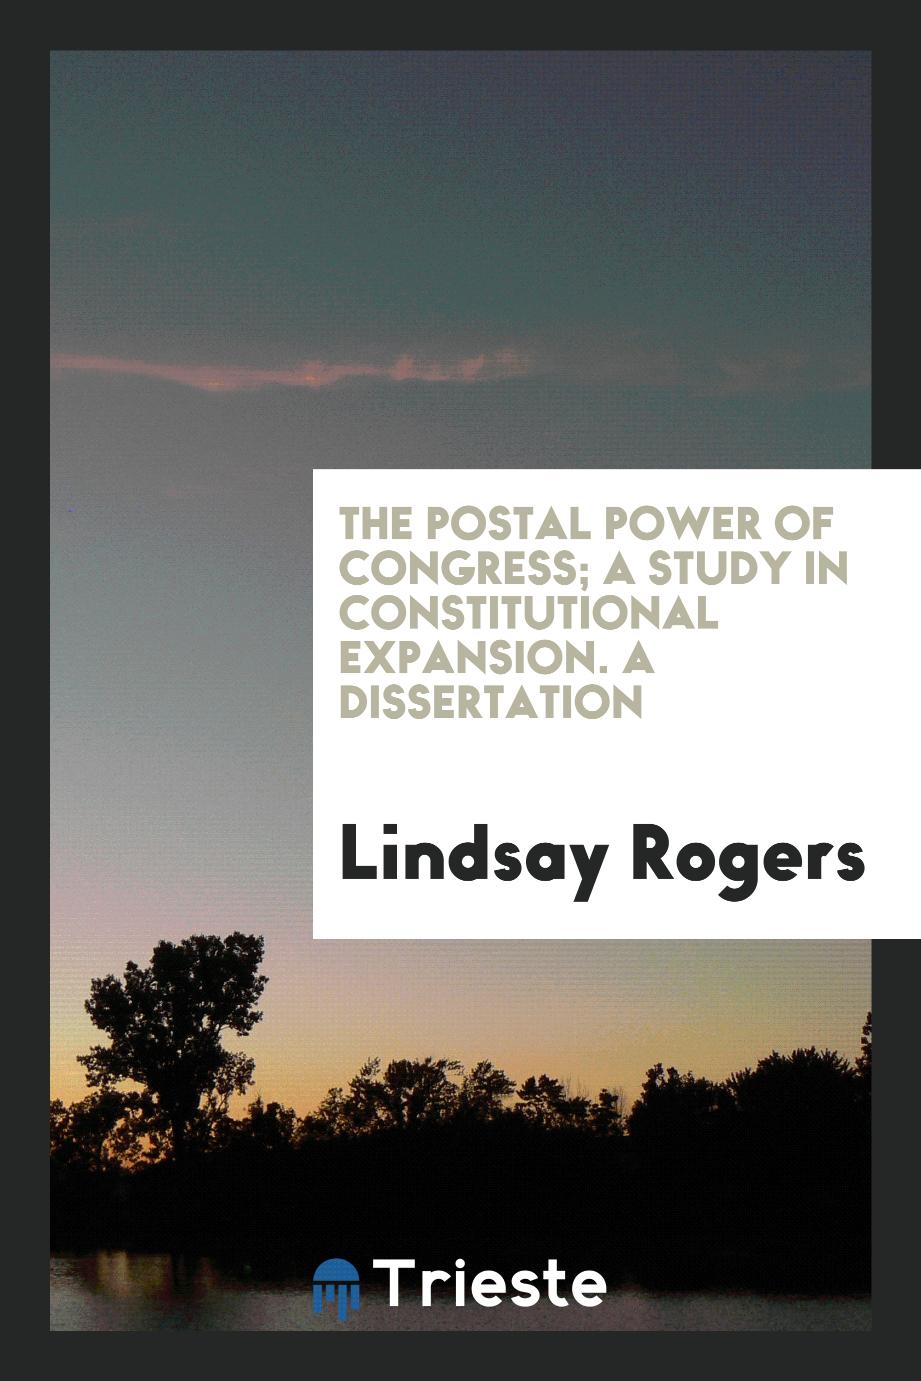 The postal power of Congress; a study in constitutional expansion. A dissertation